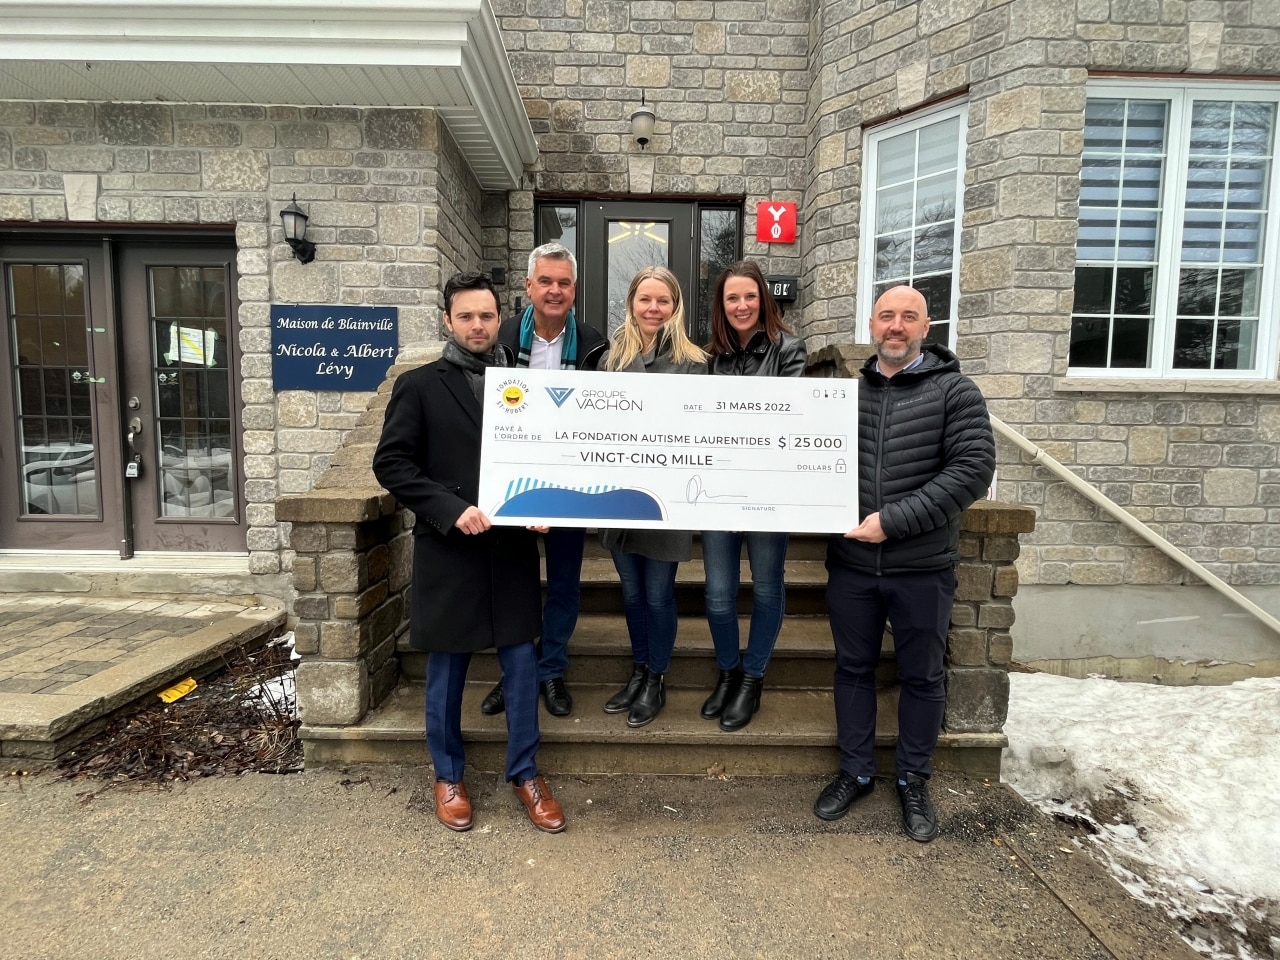 Group of people holding a check for the Fondation Autisme Laurentides